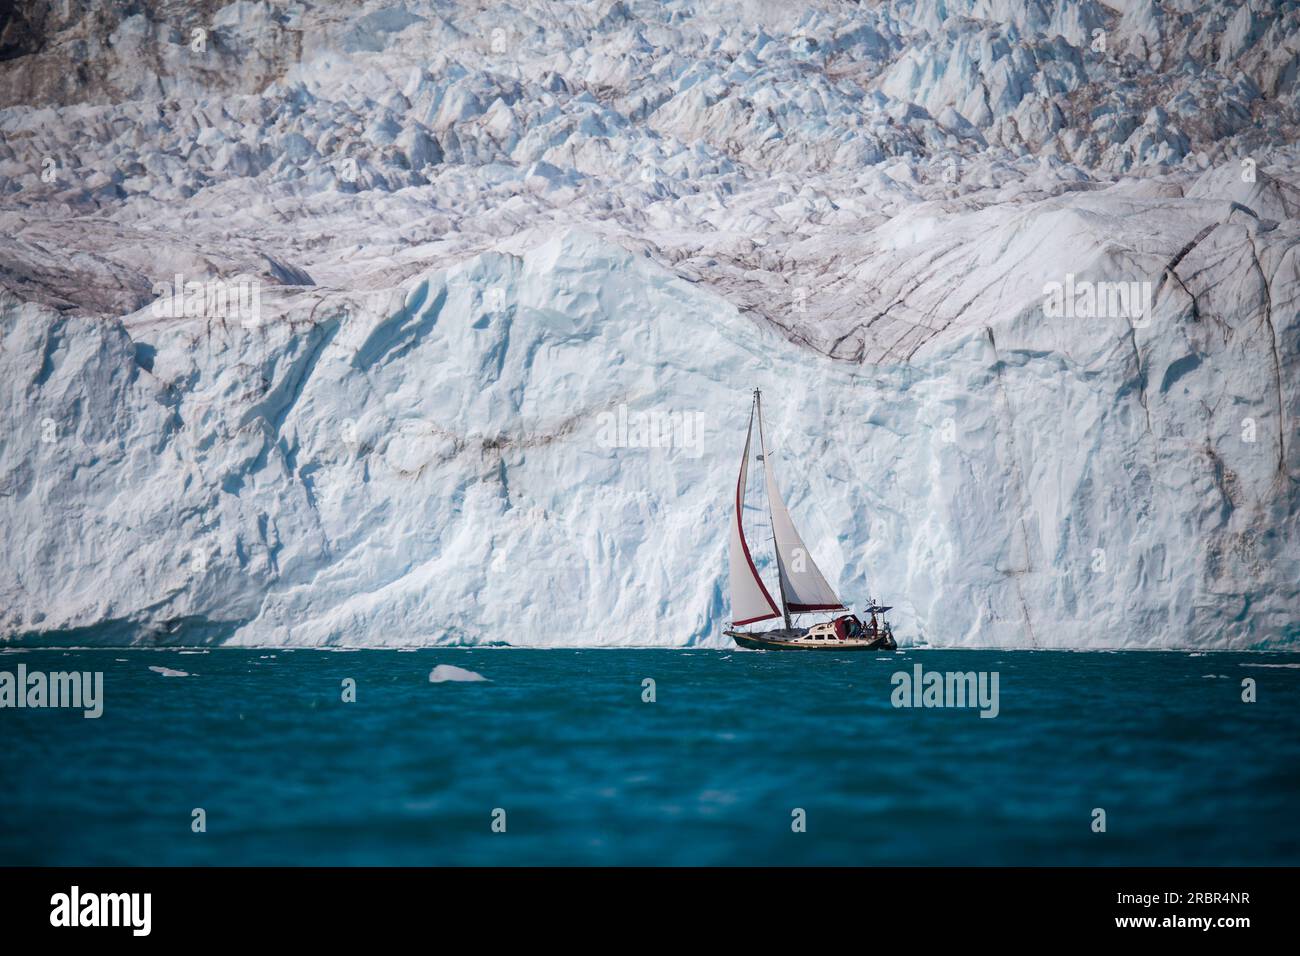 Extreme sail along the face of a massive glacier in East Greenland. Sailboat is sailing among icebergs with a full sail out. Stock Photo